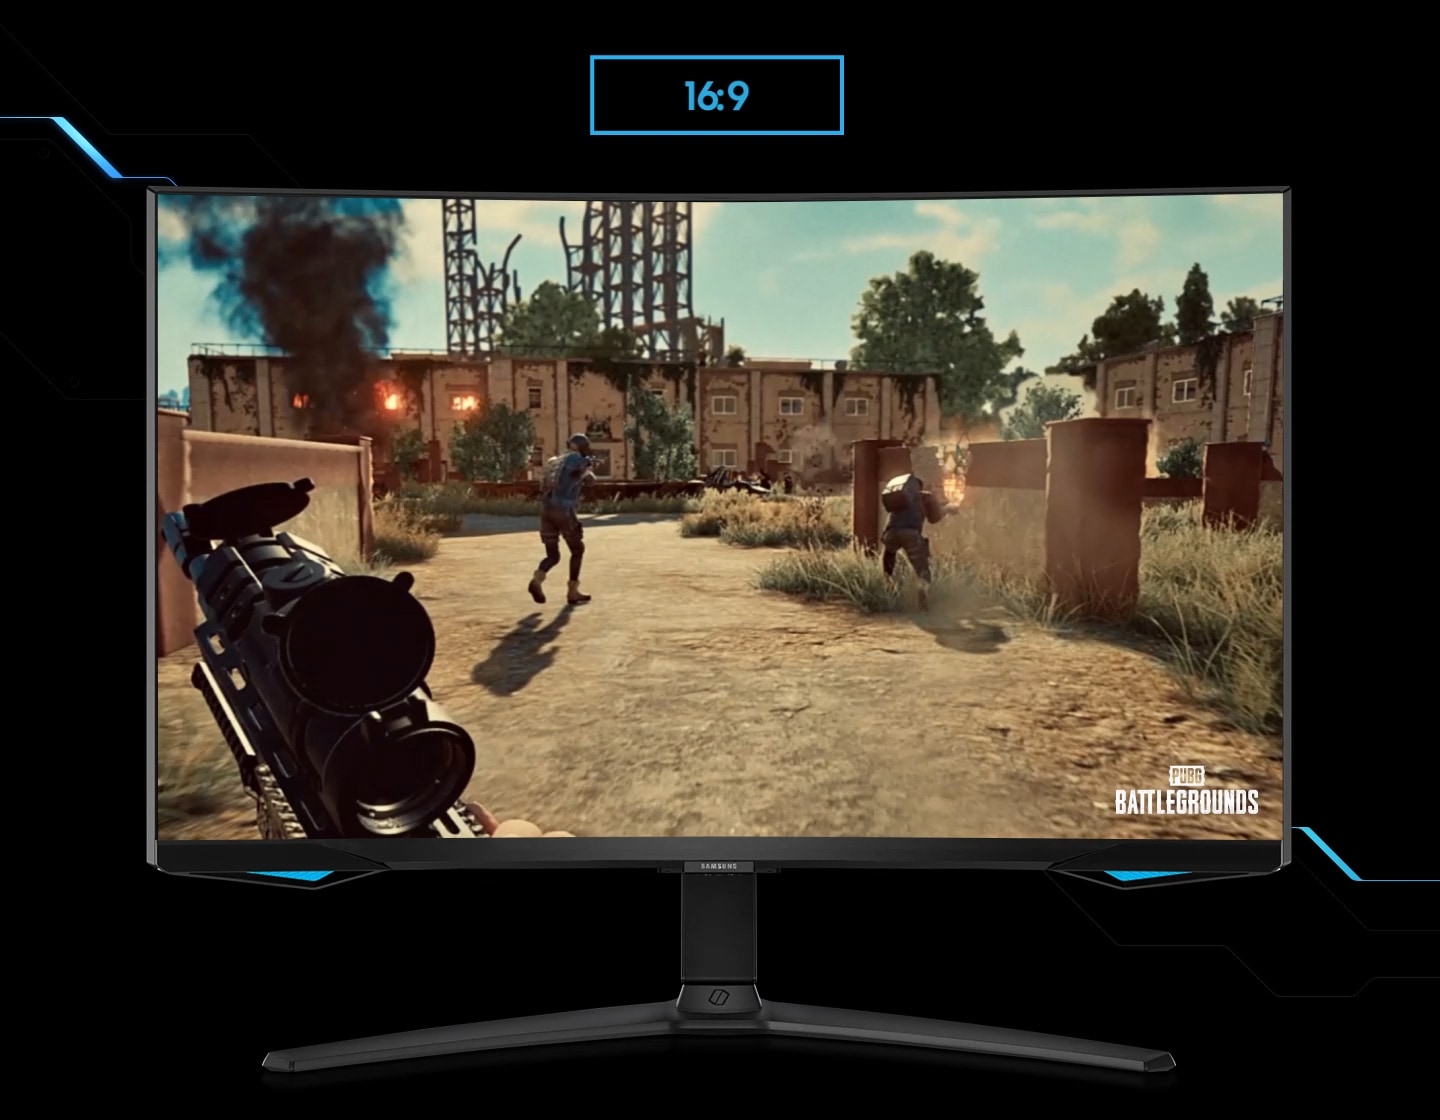 A monitor shows the perspective of a player within a first-person action game. As the screen is extended from 16:9 to 21:9 proportion, an enemy appears in the far left corner, revealed thanks to the monitor's wider perspective. The game title &quot"PUBG BATTLEGROUND&quot" is located in the lower right corner.